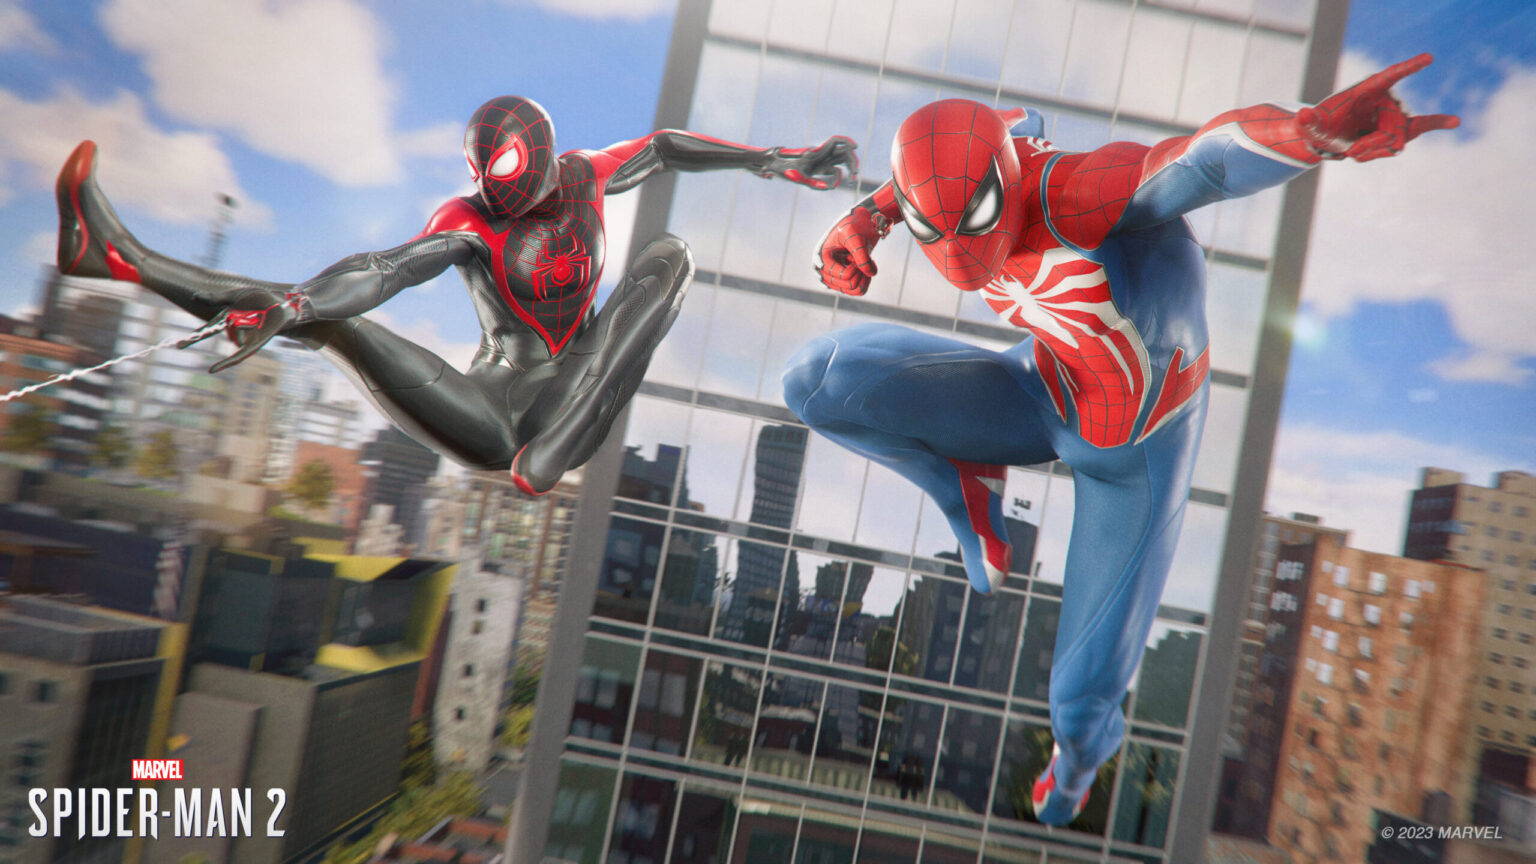 Insomniac Games releases two new posters for Marvel's Spider-Man 2 one month before release.